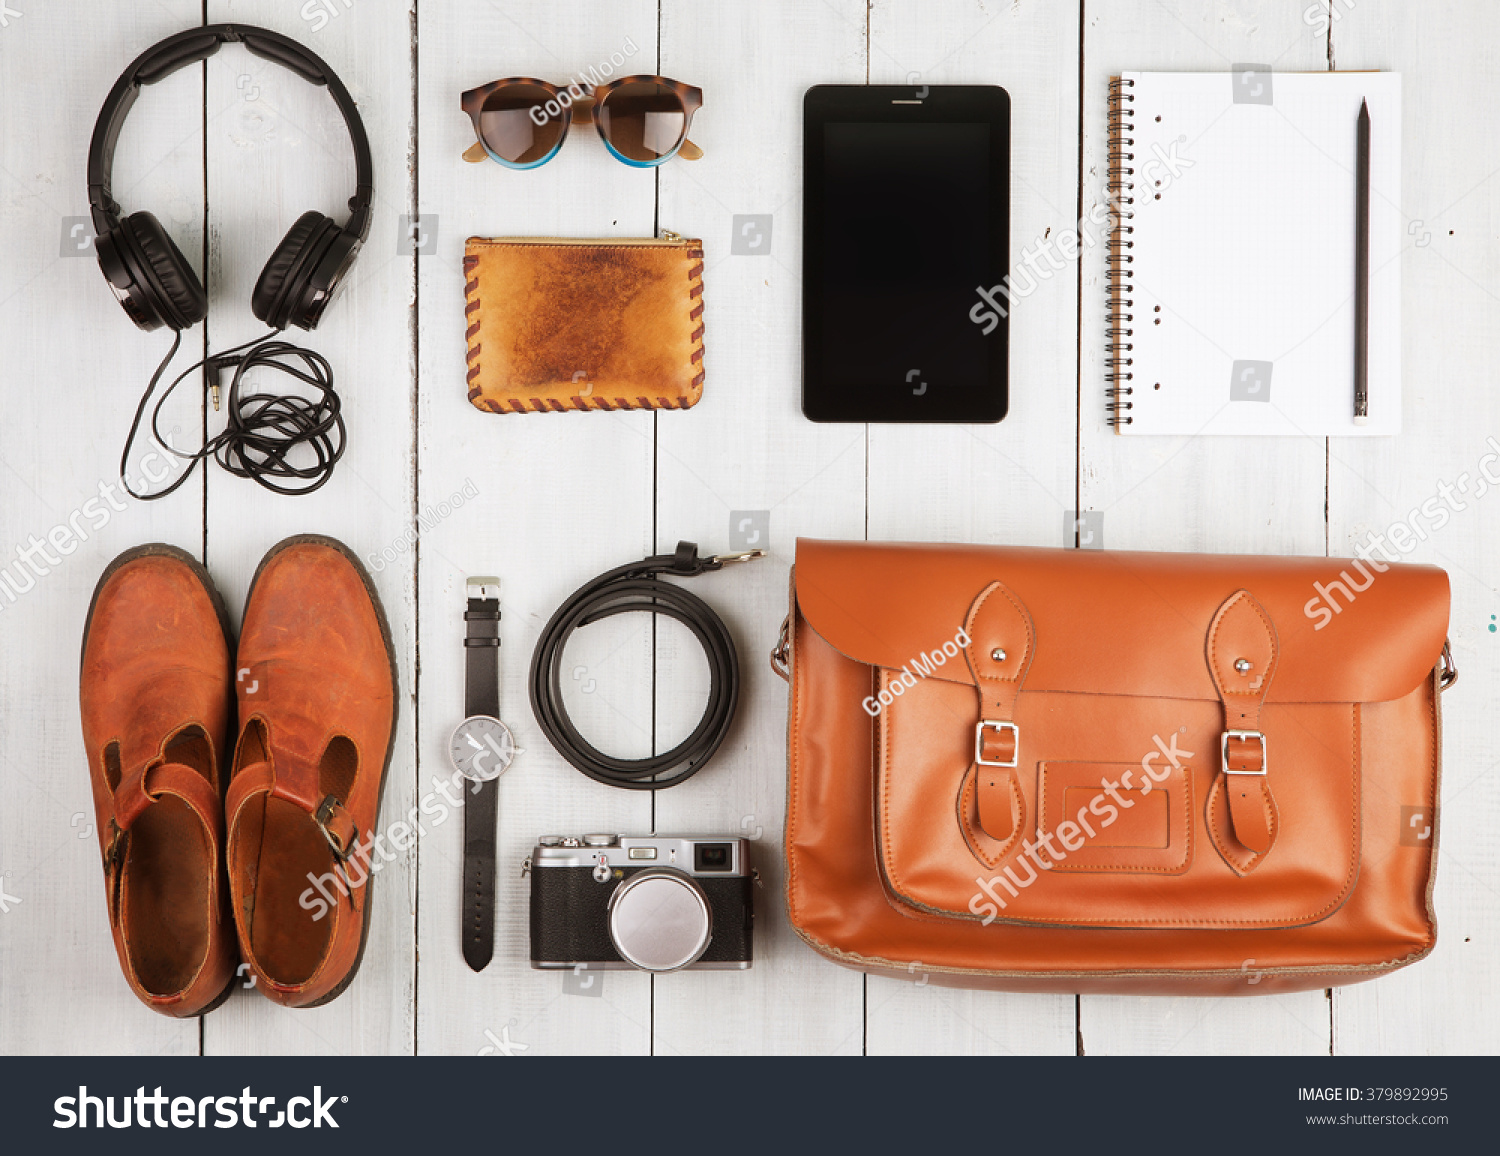 Travel concept - tablet pc, headphones, camera, shoes, watch and bag on the desk #379892995